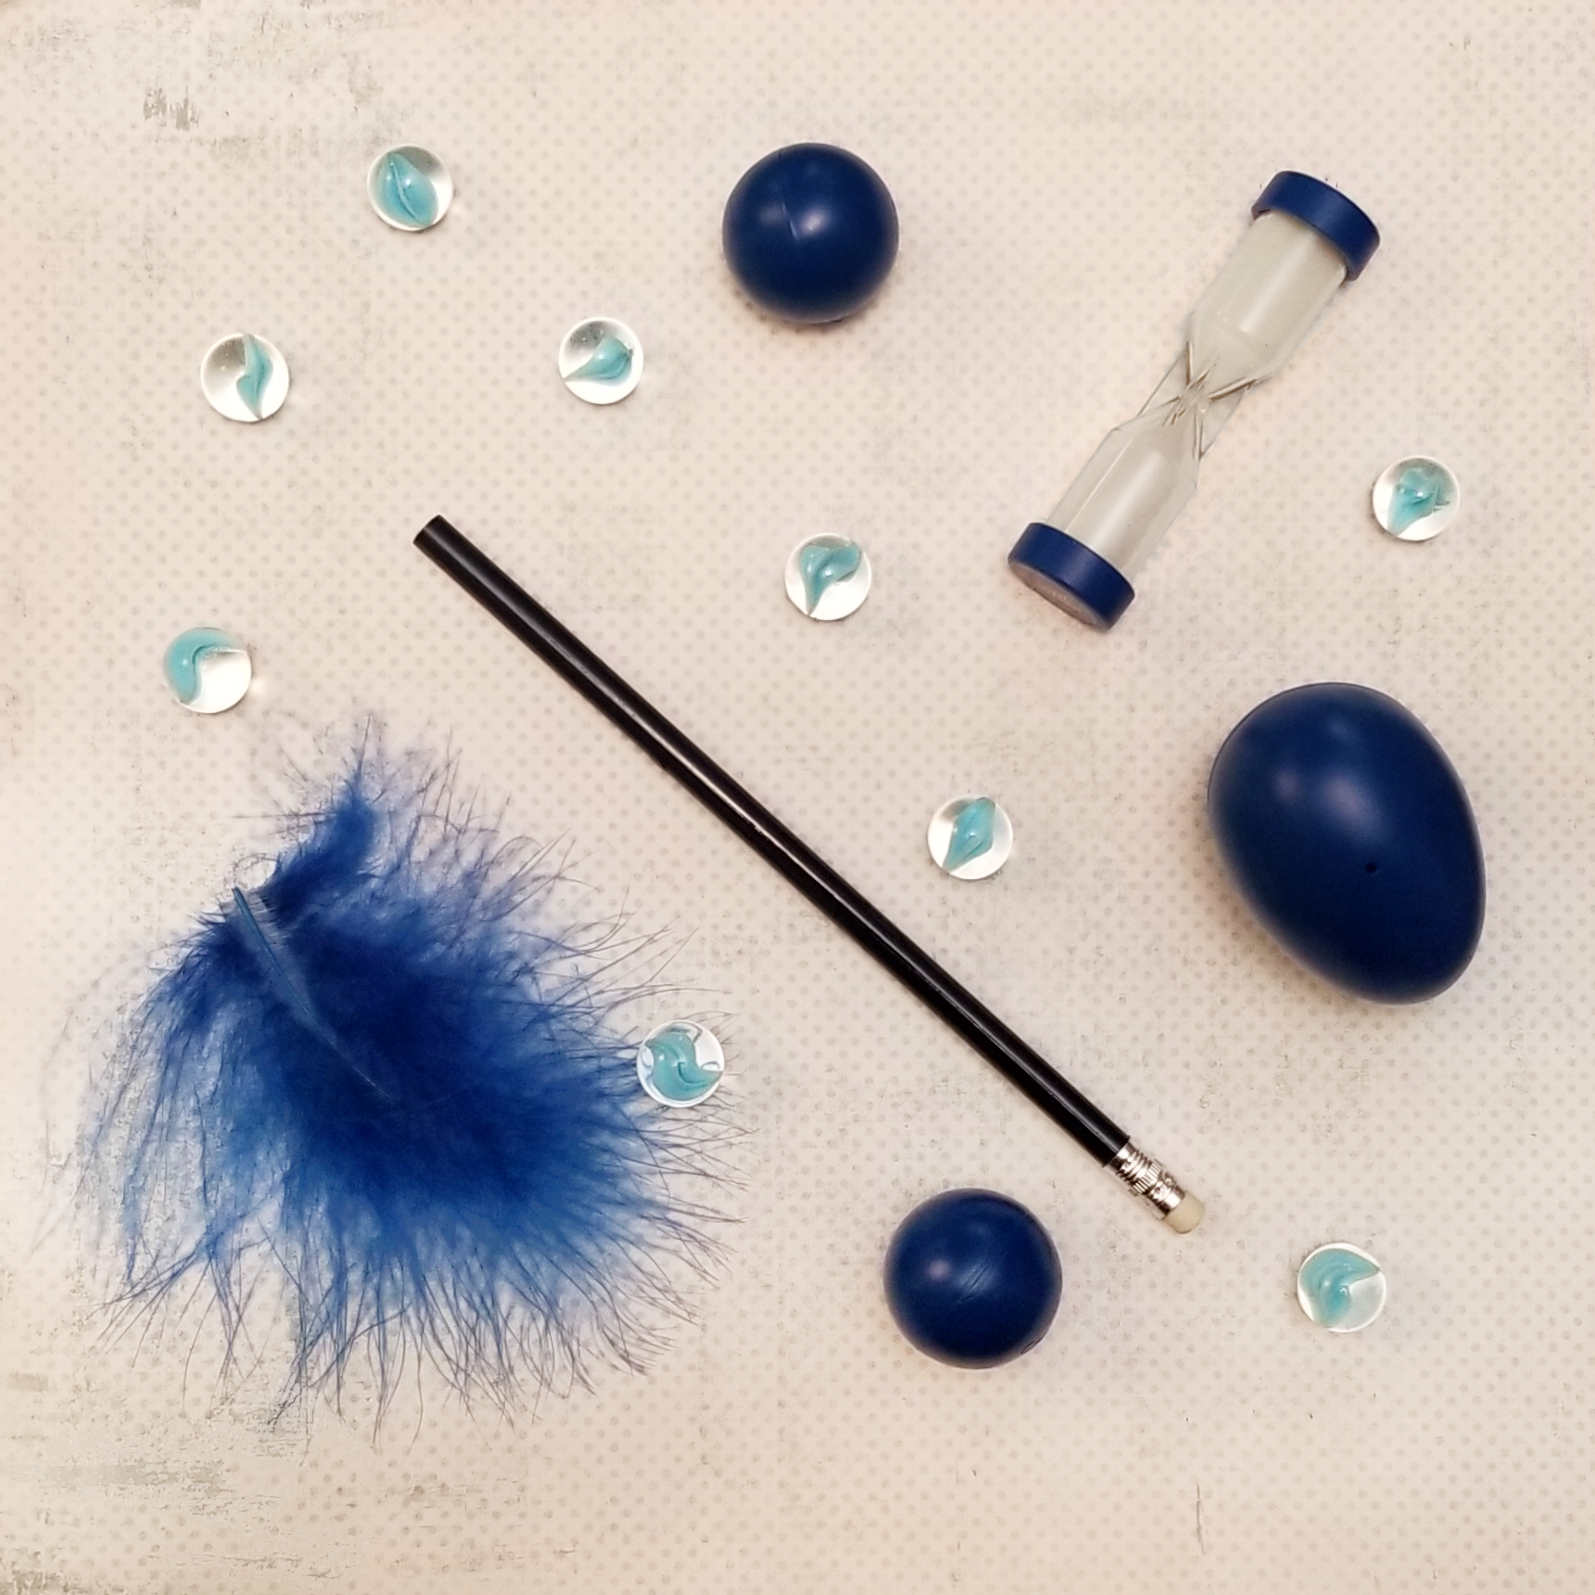 Assorted items used in minute to win it games, including a feather, pencil, marbles, and plastic eggs.